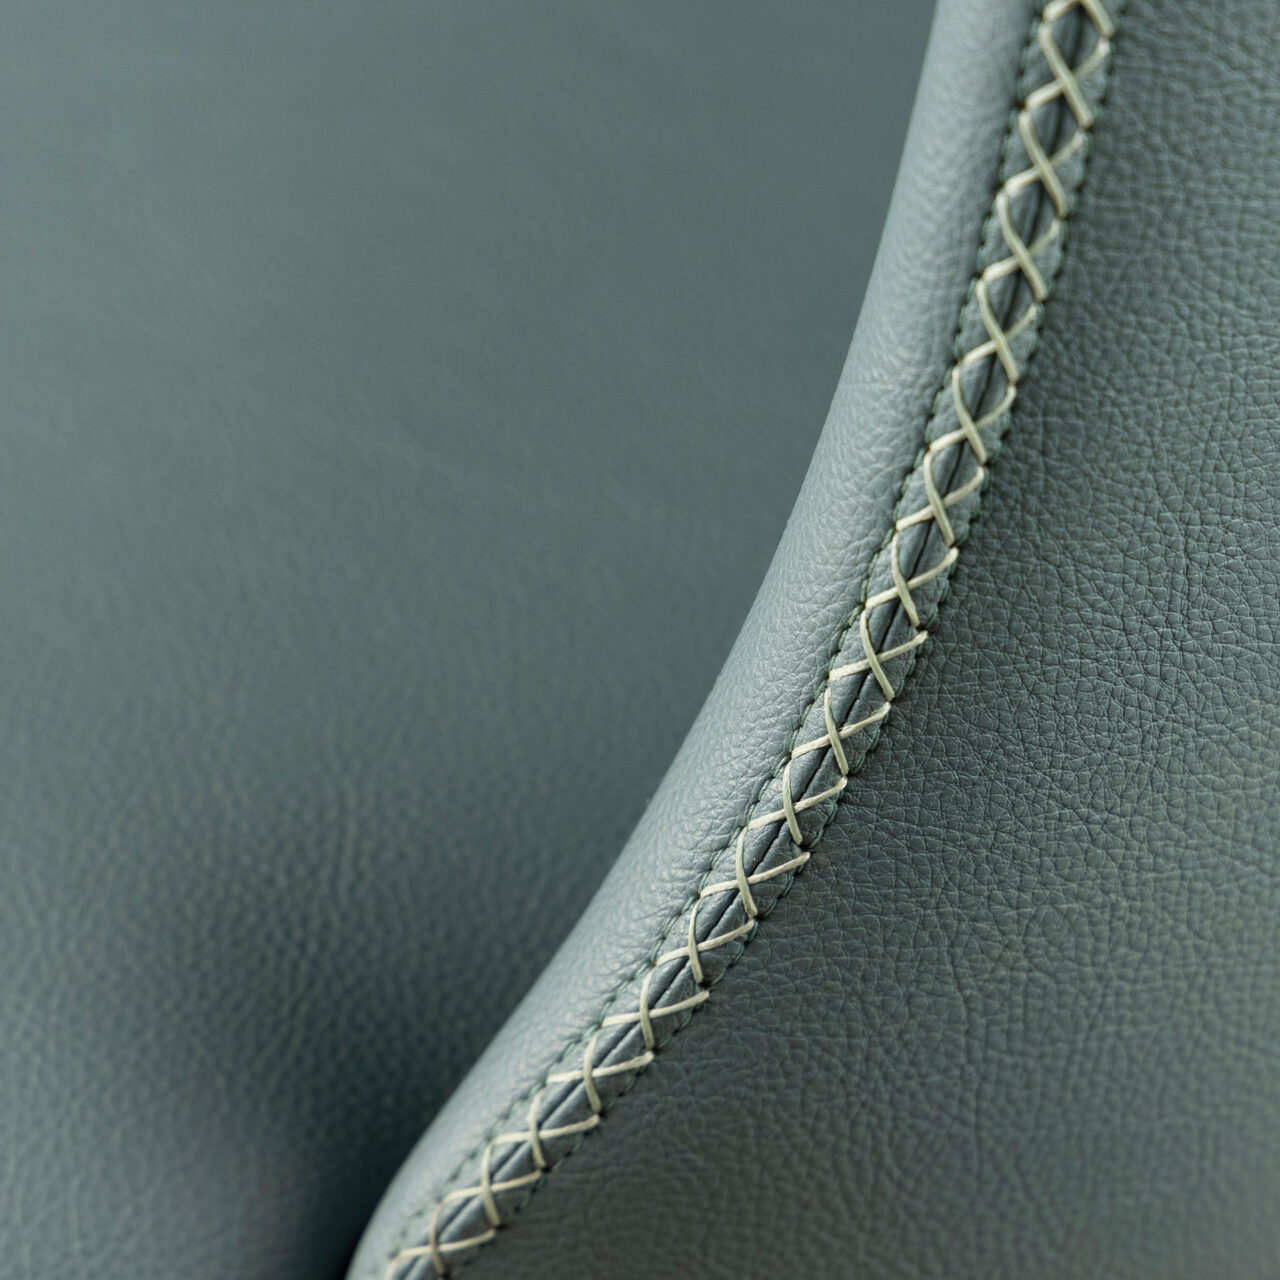 A close-up of SENTIENT Furniture's custom upholstery detailing, highlighting the meticulous gray leather stitching along the edge of a high-quality, handcrafted seat.